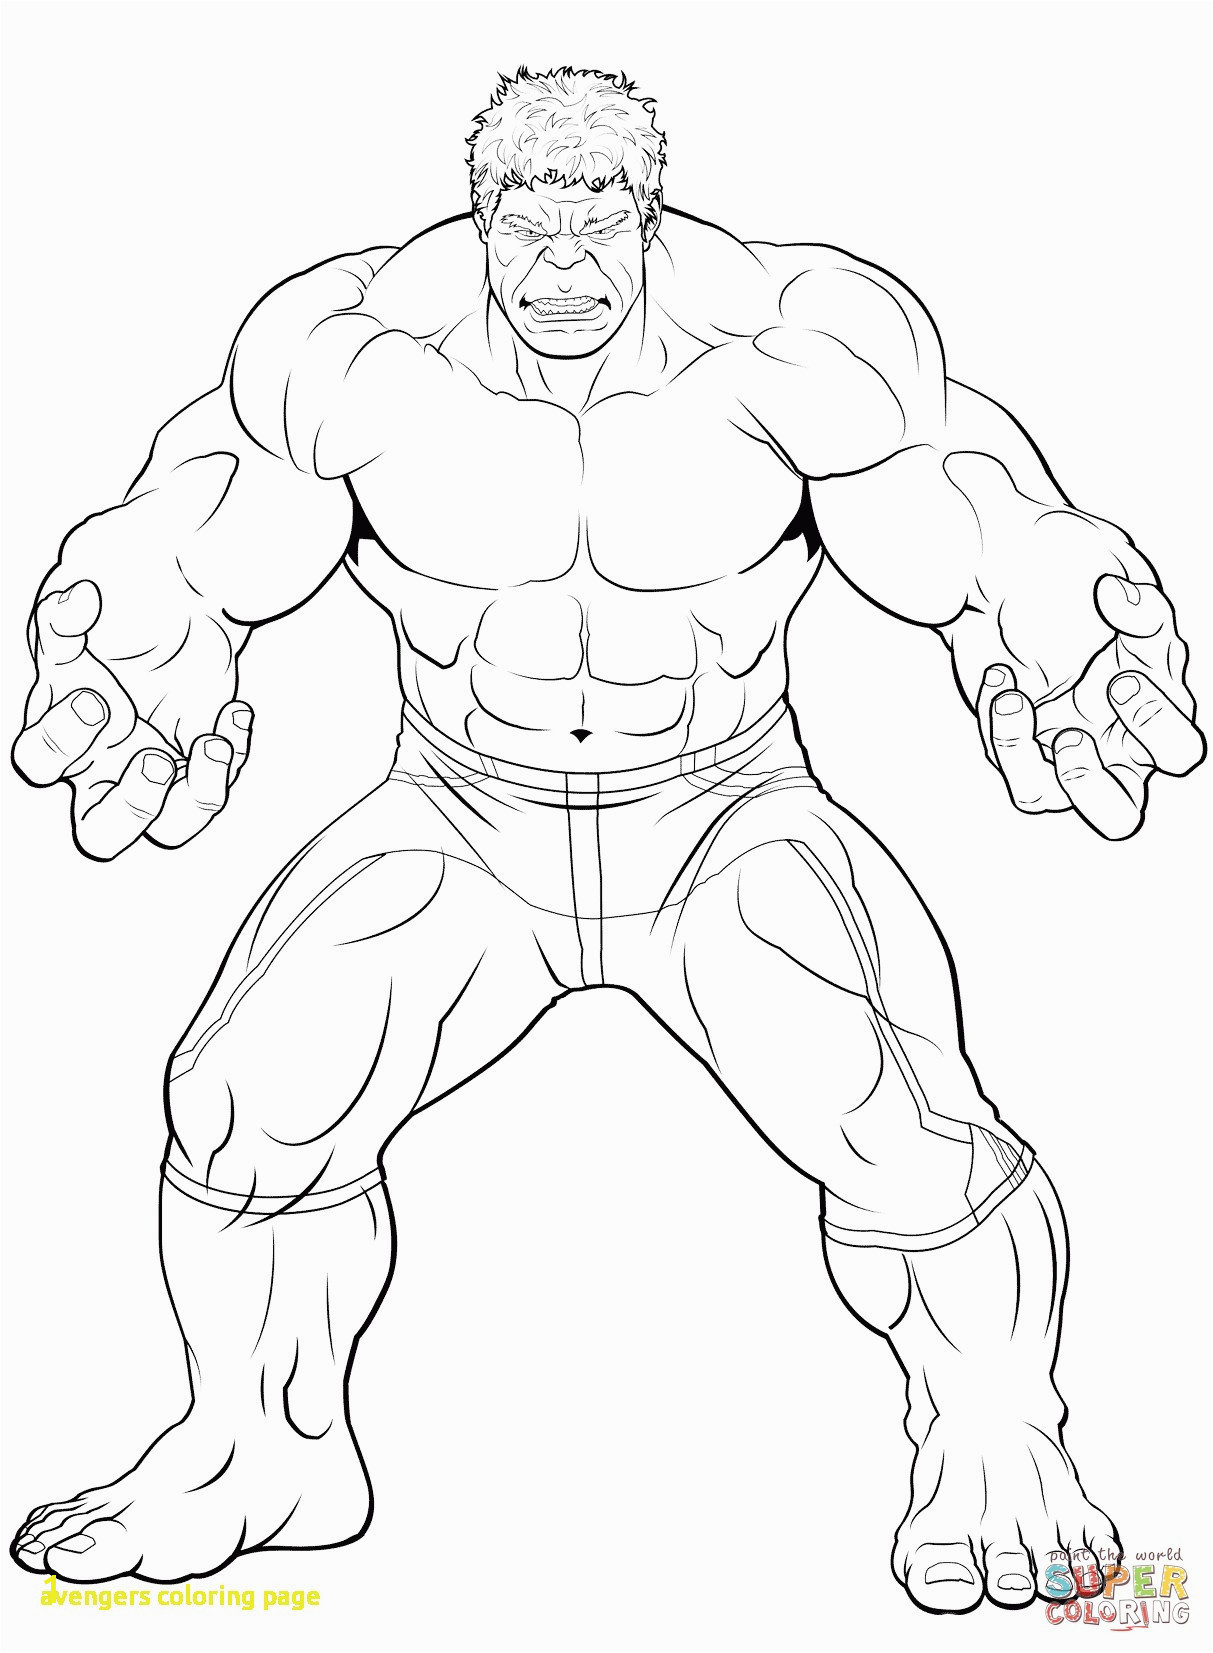 Incredible Hulk Coloring Pages to Print the Incredible Hulk Coloring Pages Coloring Pages Coloring Pages